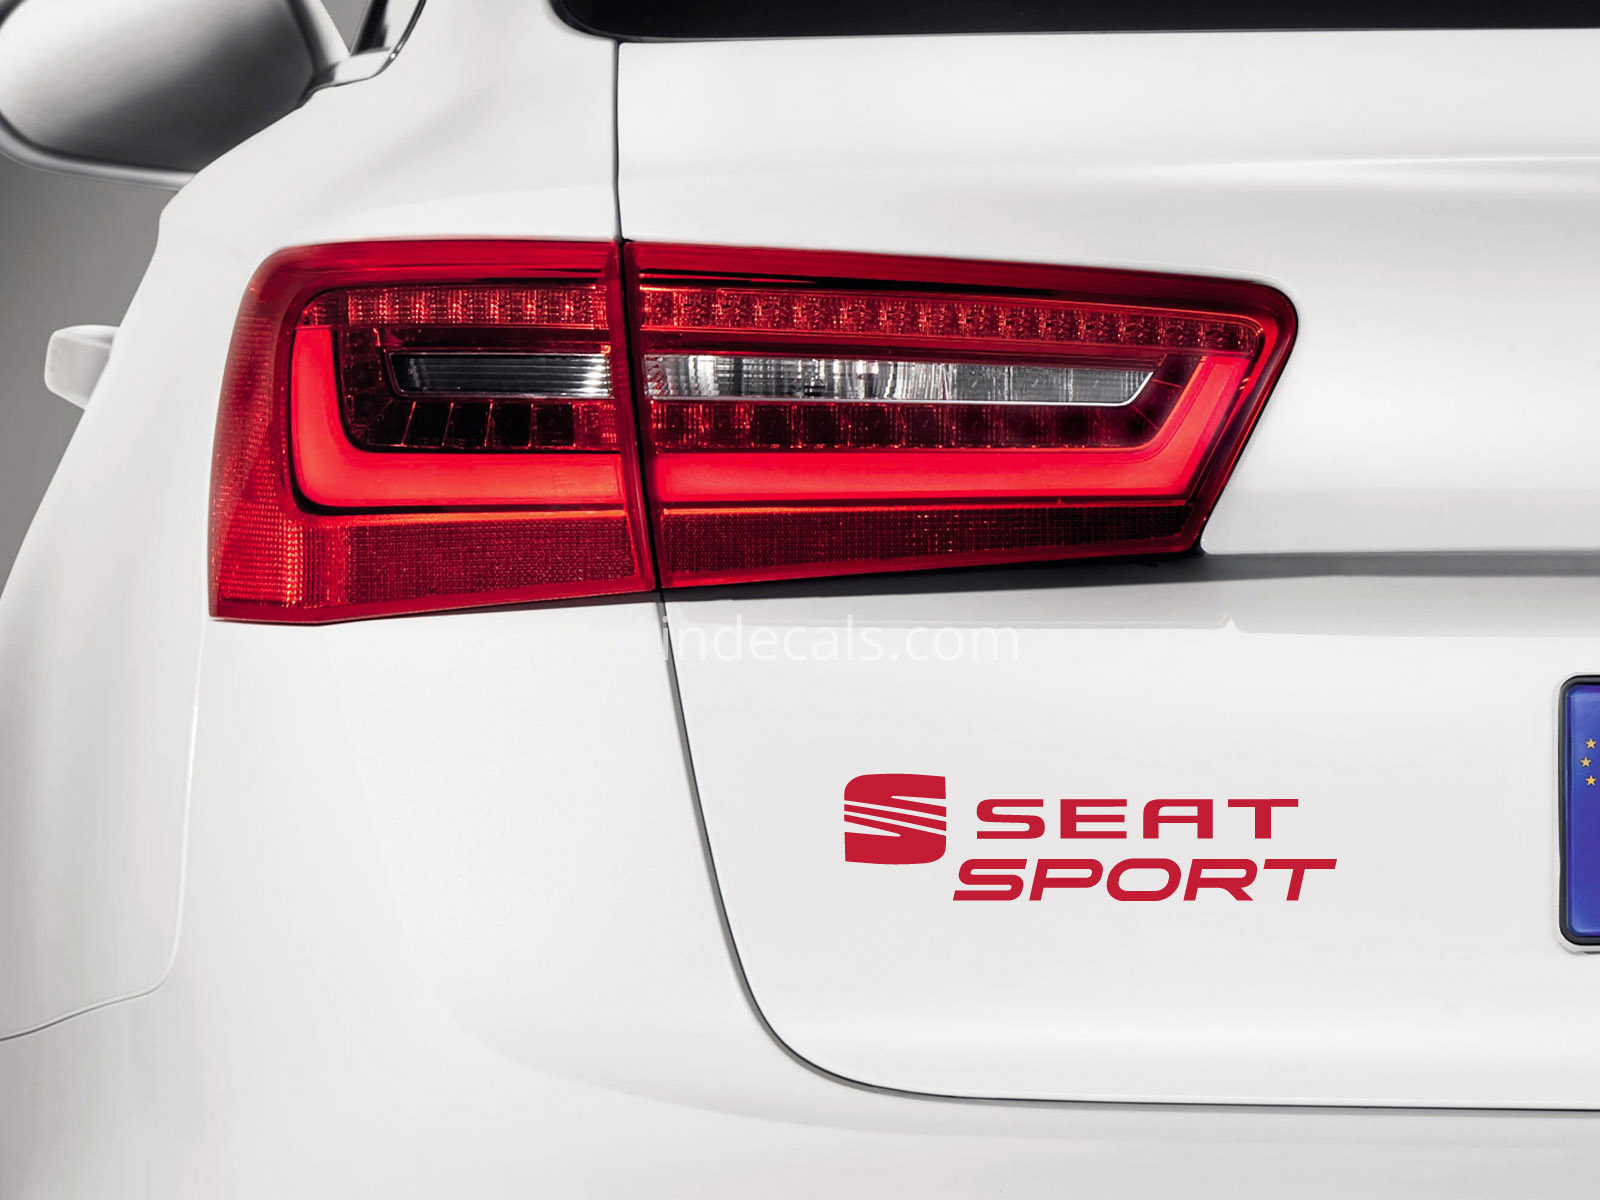 1 x Seat Sports Sticker for Trunk - Red